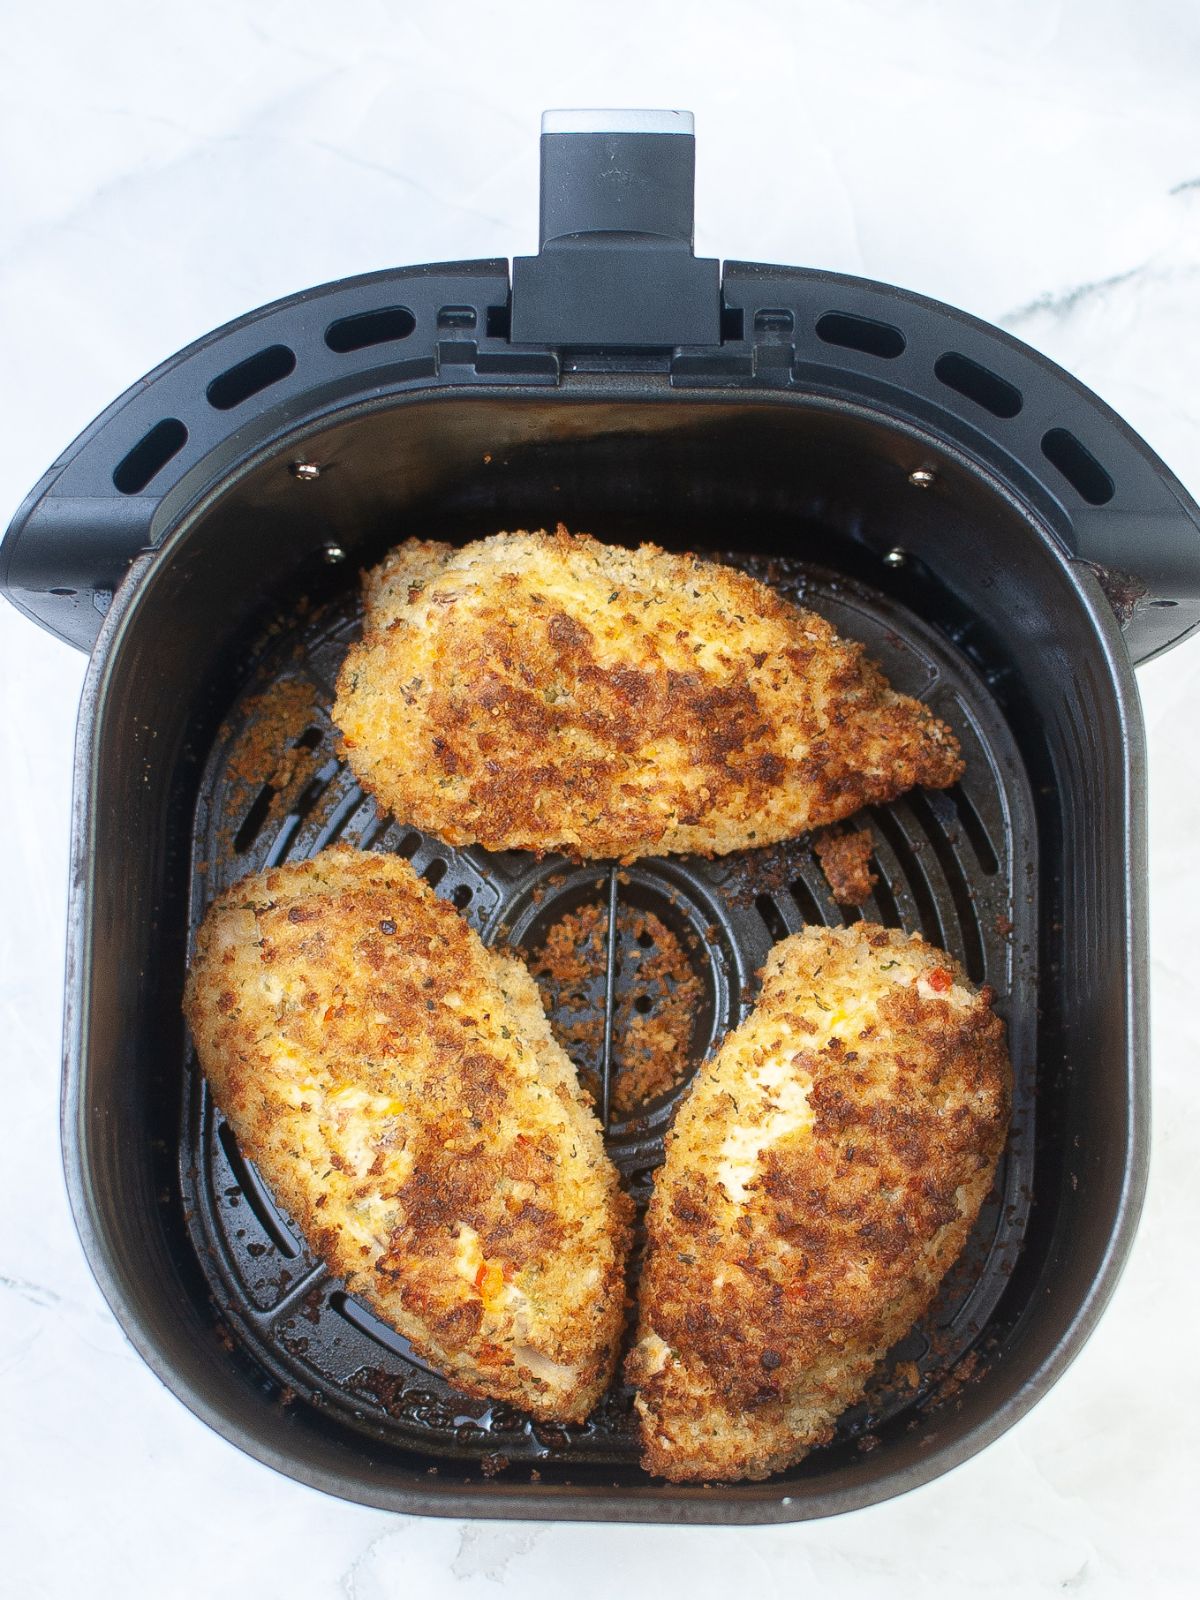 3 chicken breasts baked in the air fryer.